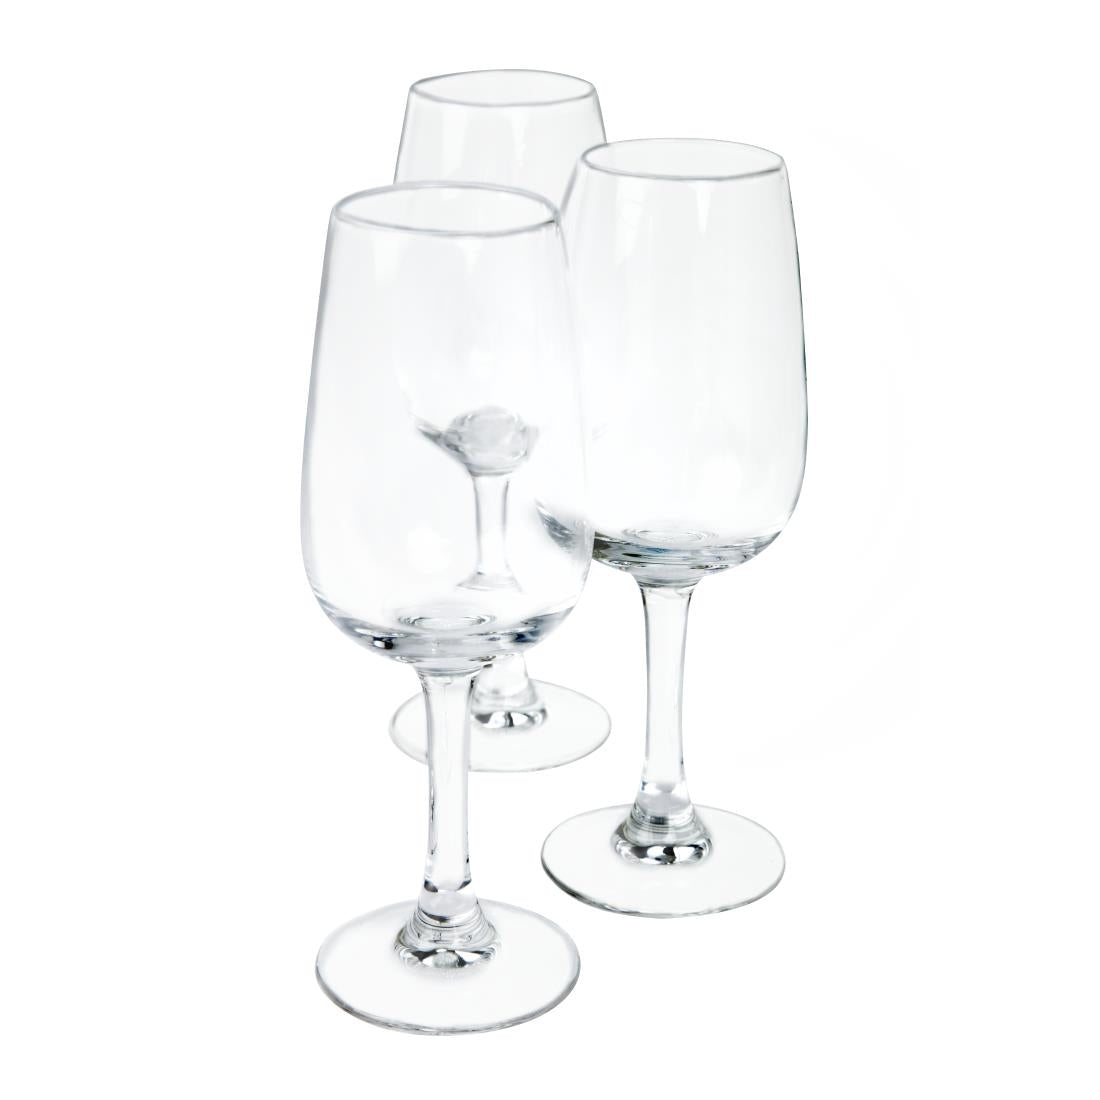 DP099 Chef & Sommelier Cabernet Port or Sherry Glasses 120ml (Pack of 6) JD Catering Equipment Solutions Ltd